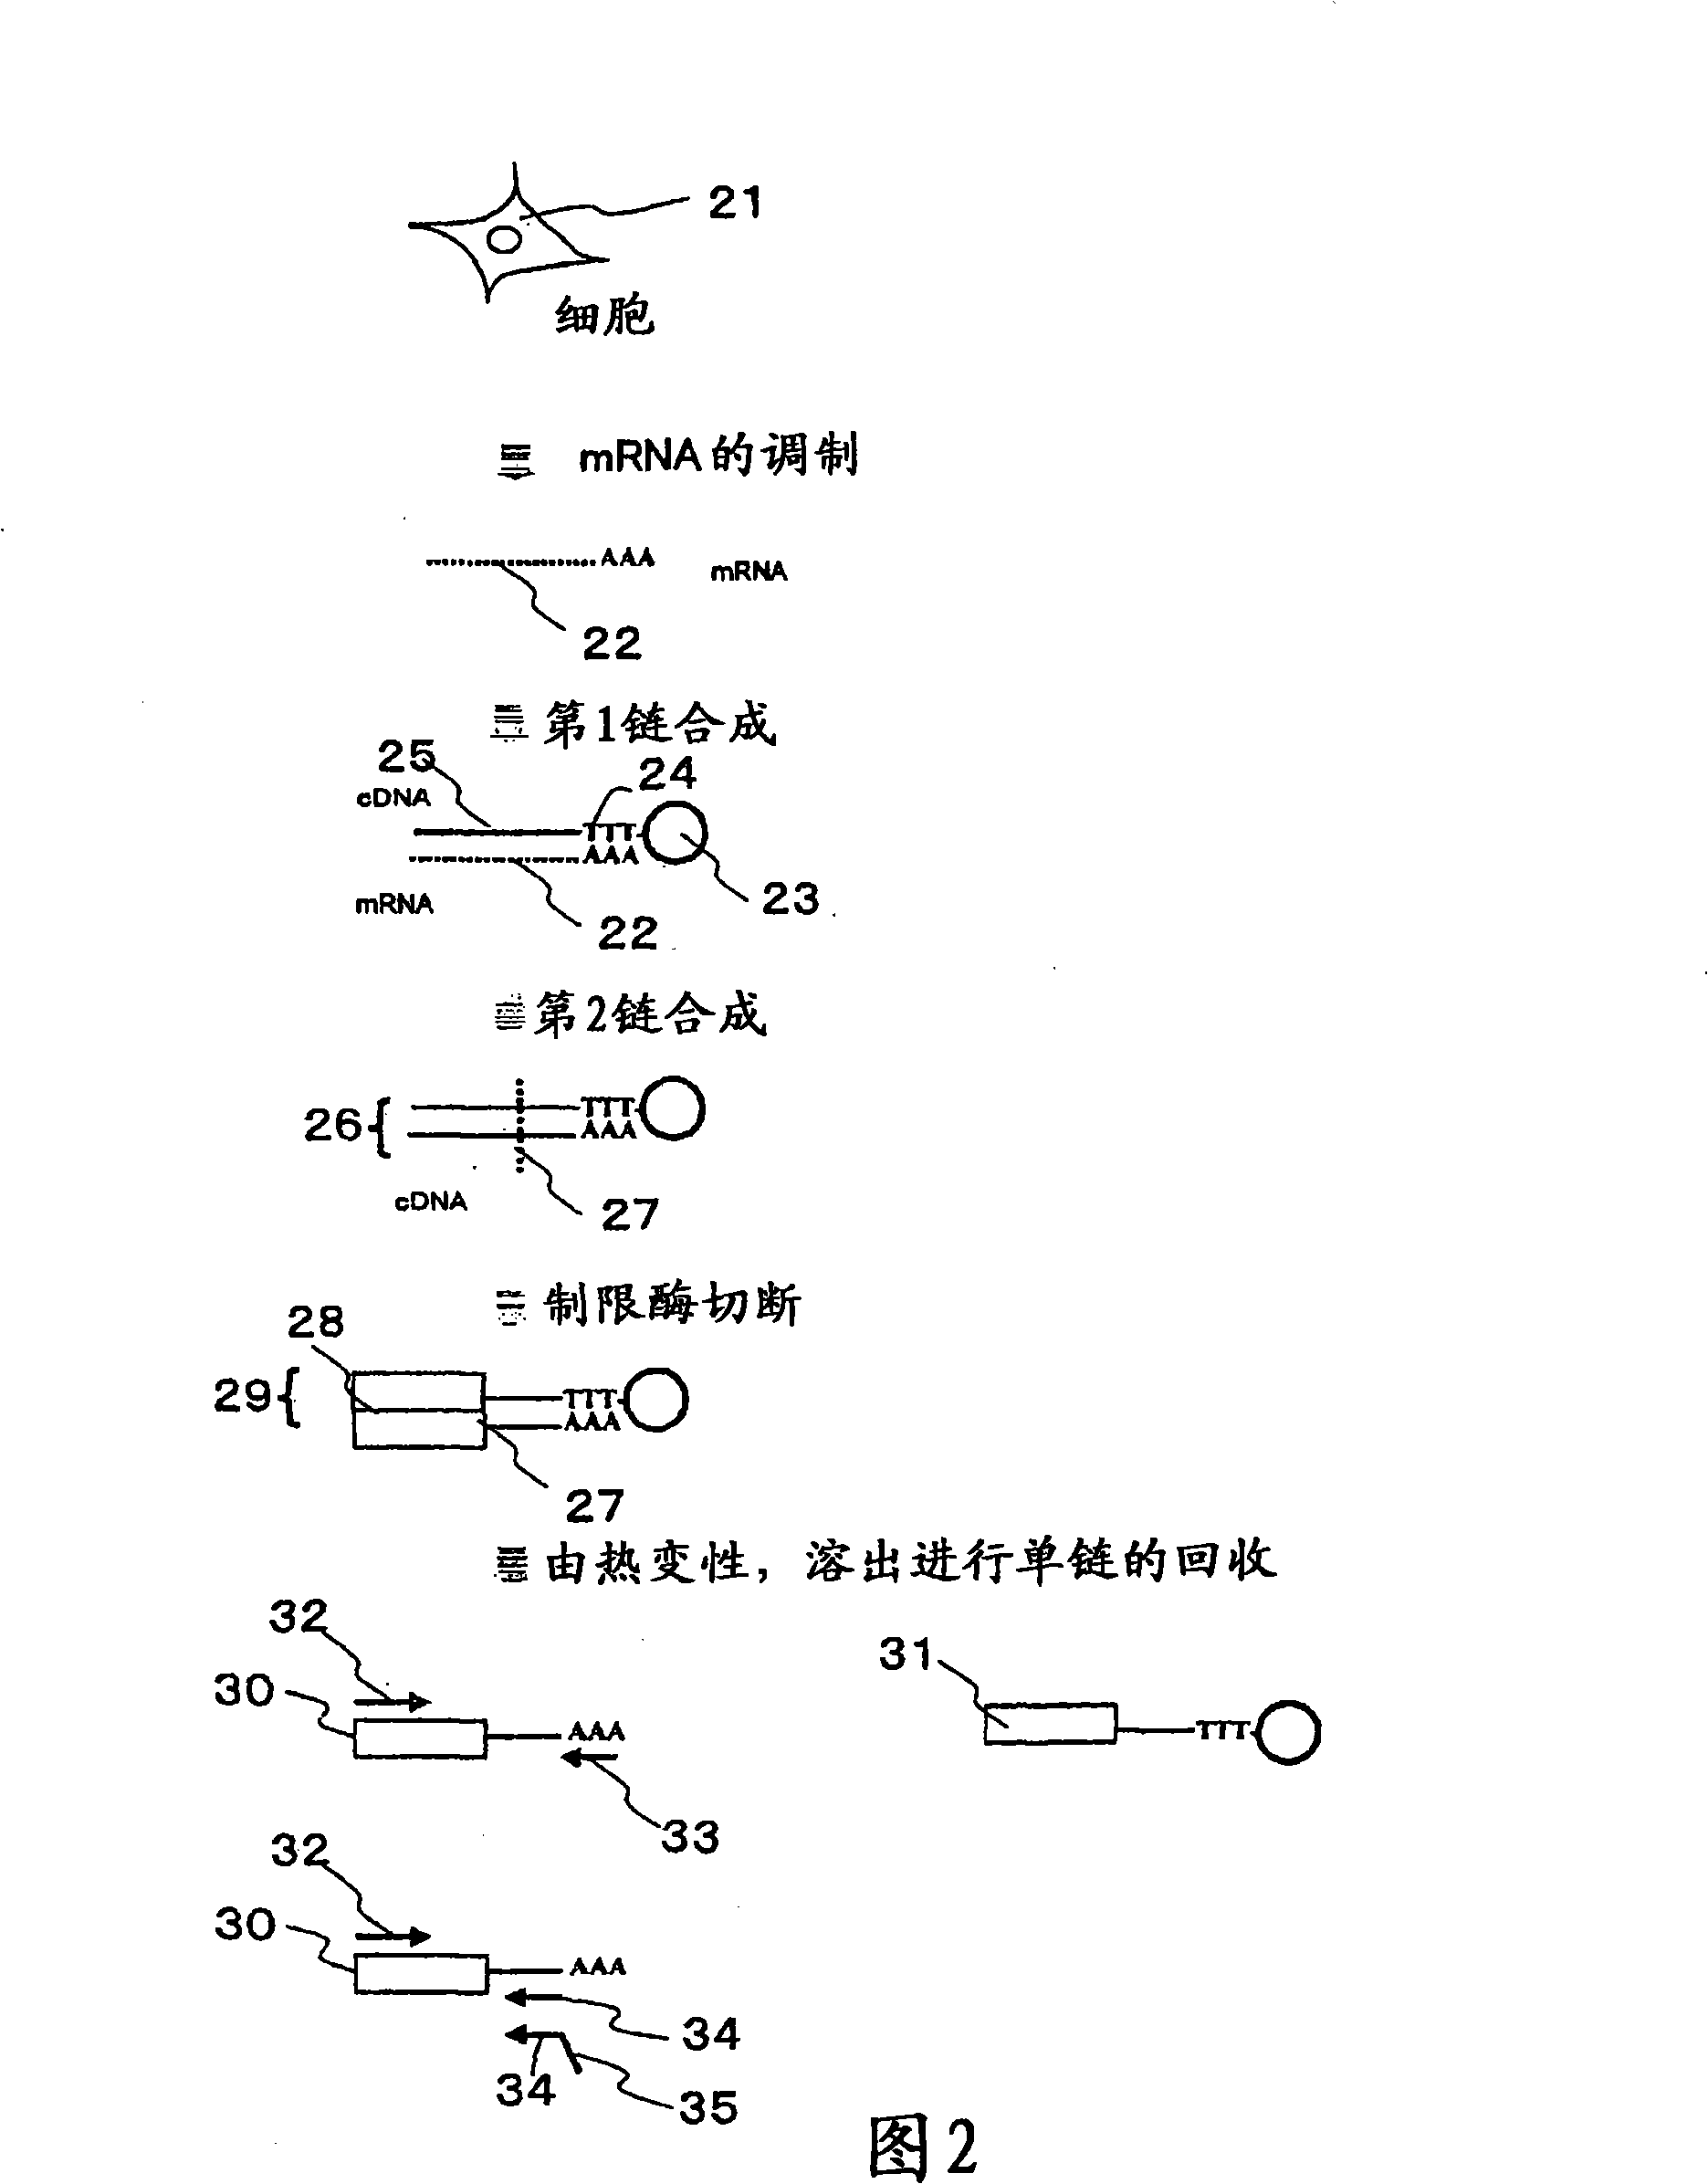 Method and apparatus for sample preparation